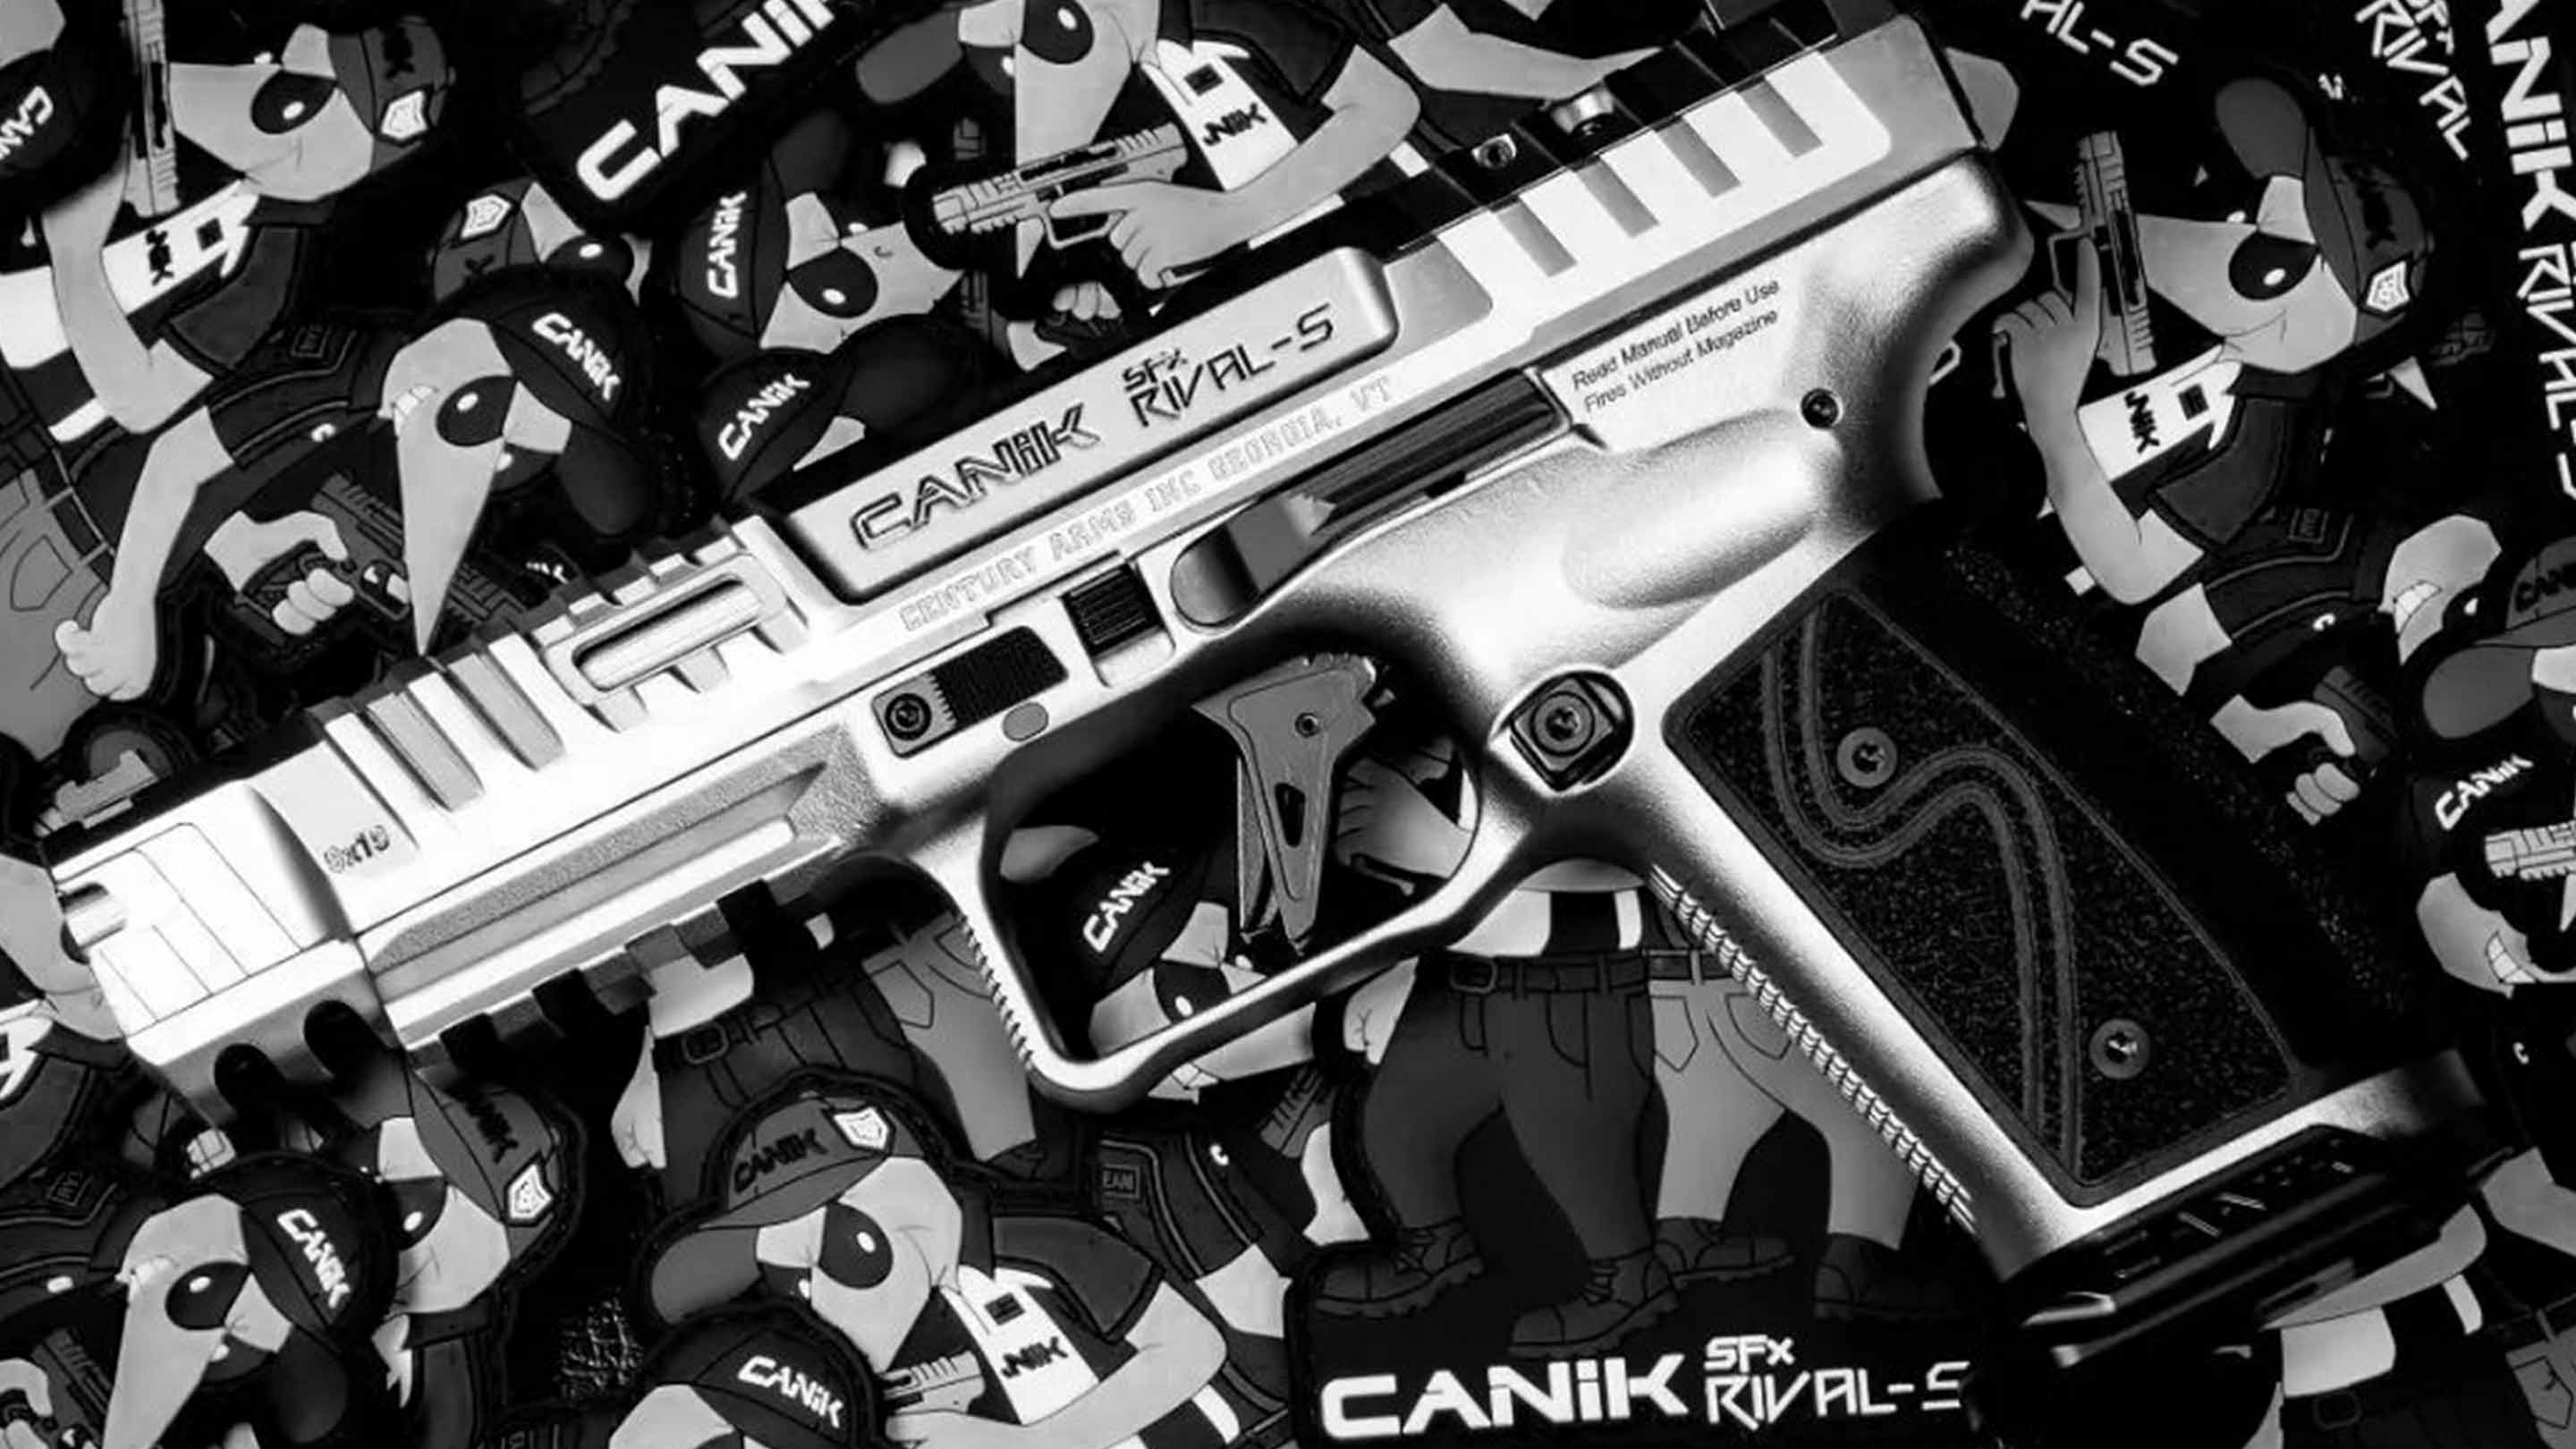 Canik SFx Rival-S Holsters